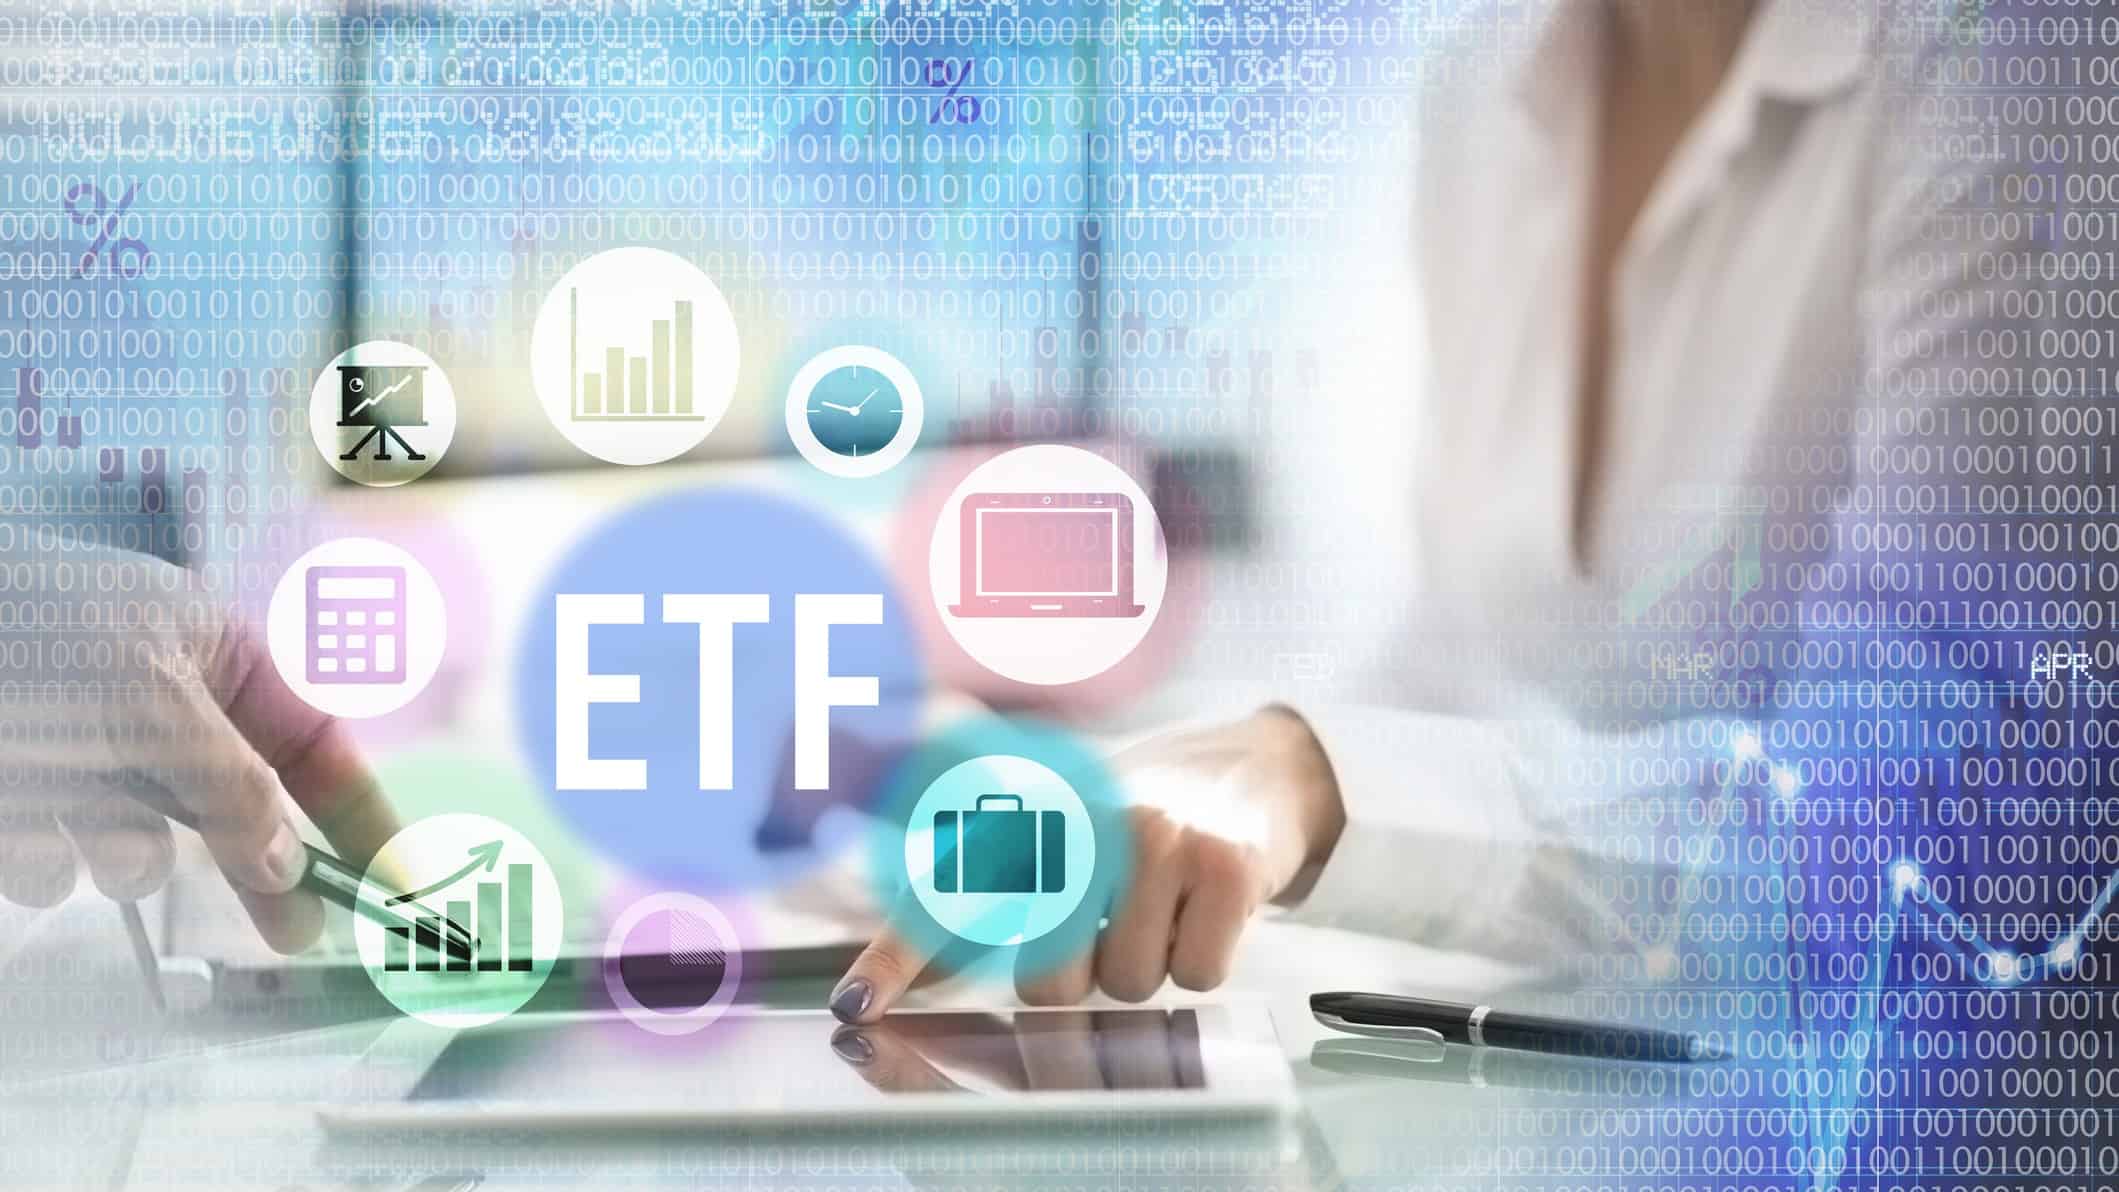 ETF with different images around it on top of a tablet.